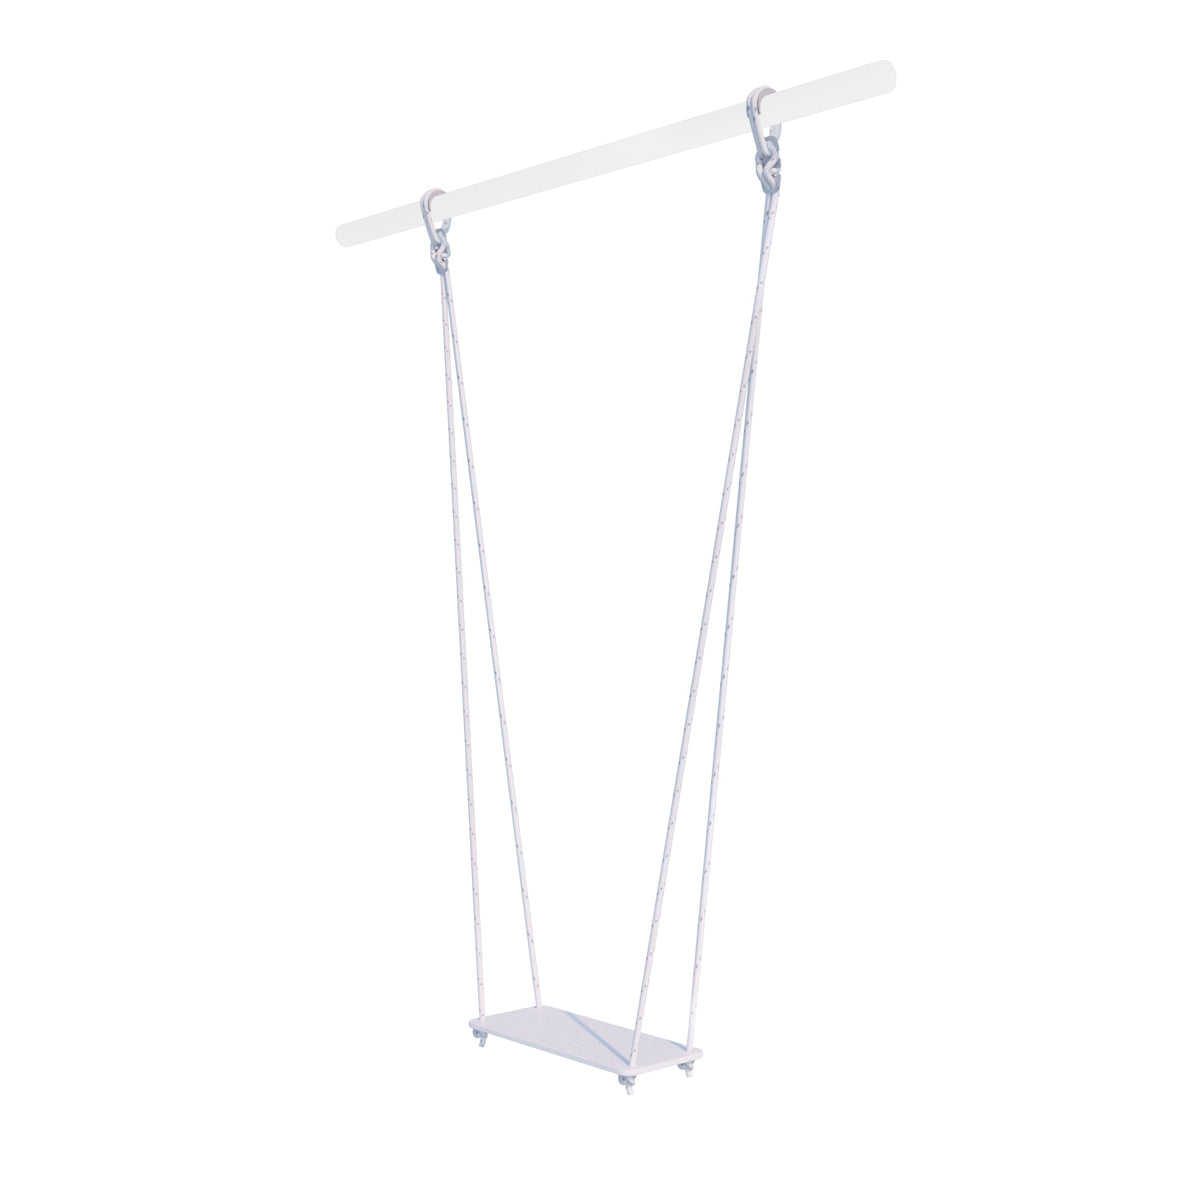 Gray Classic Swing for indoor jungle gym - Brainrich Kids